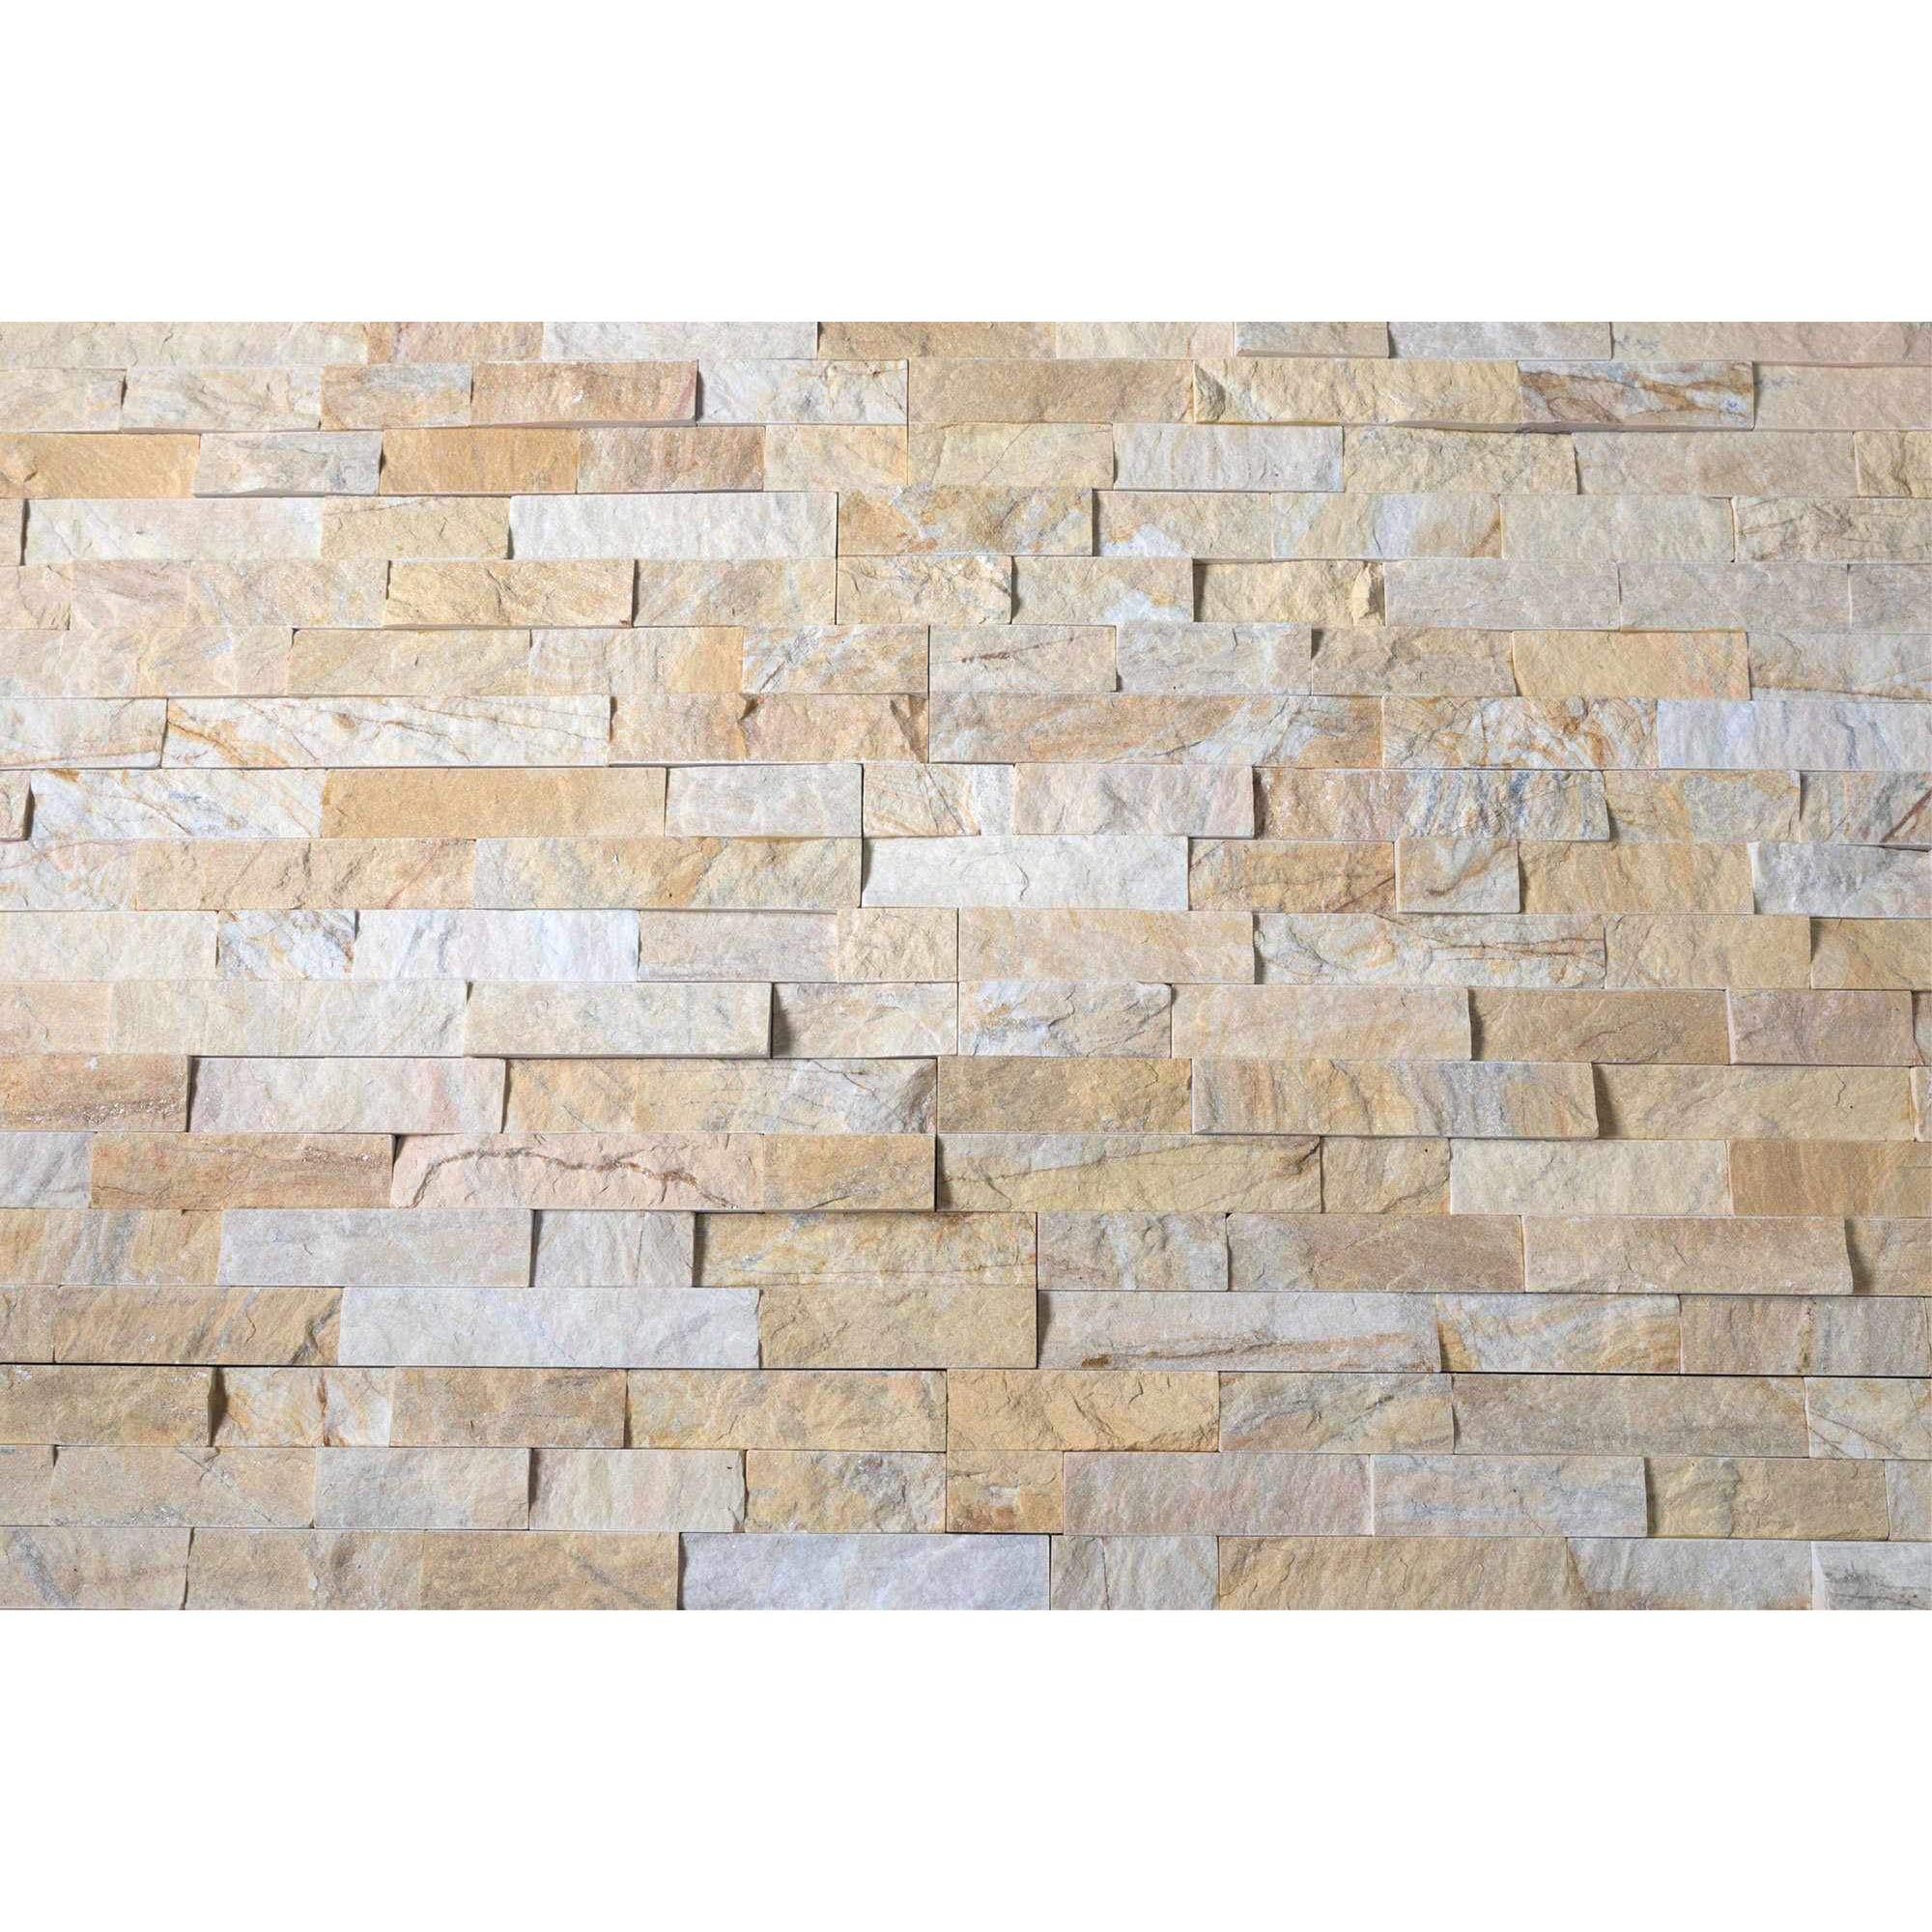 Natural Stacked Stone Wall Cladding Panels - Miami Sands